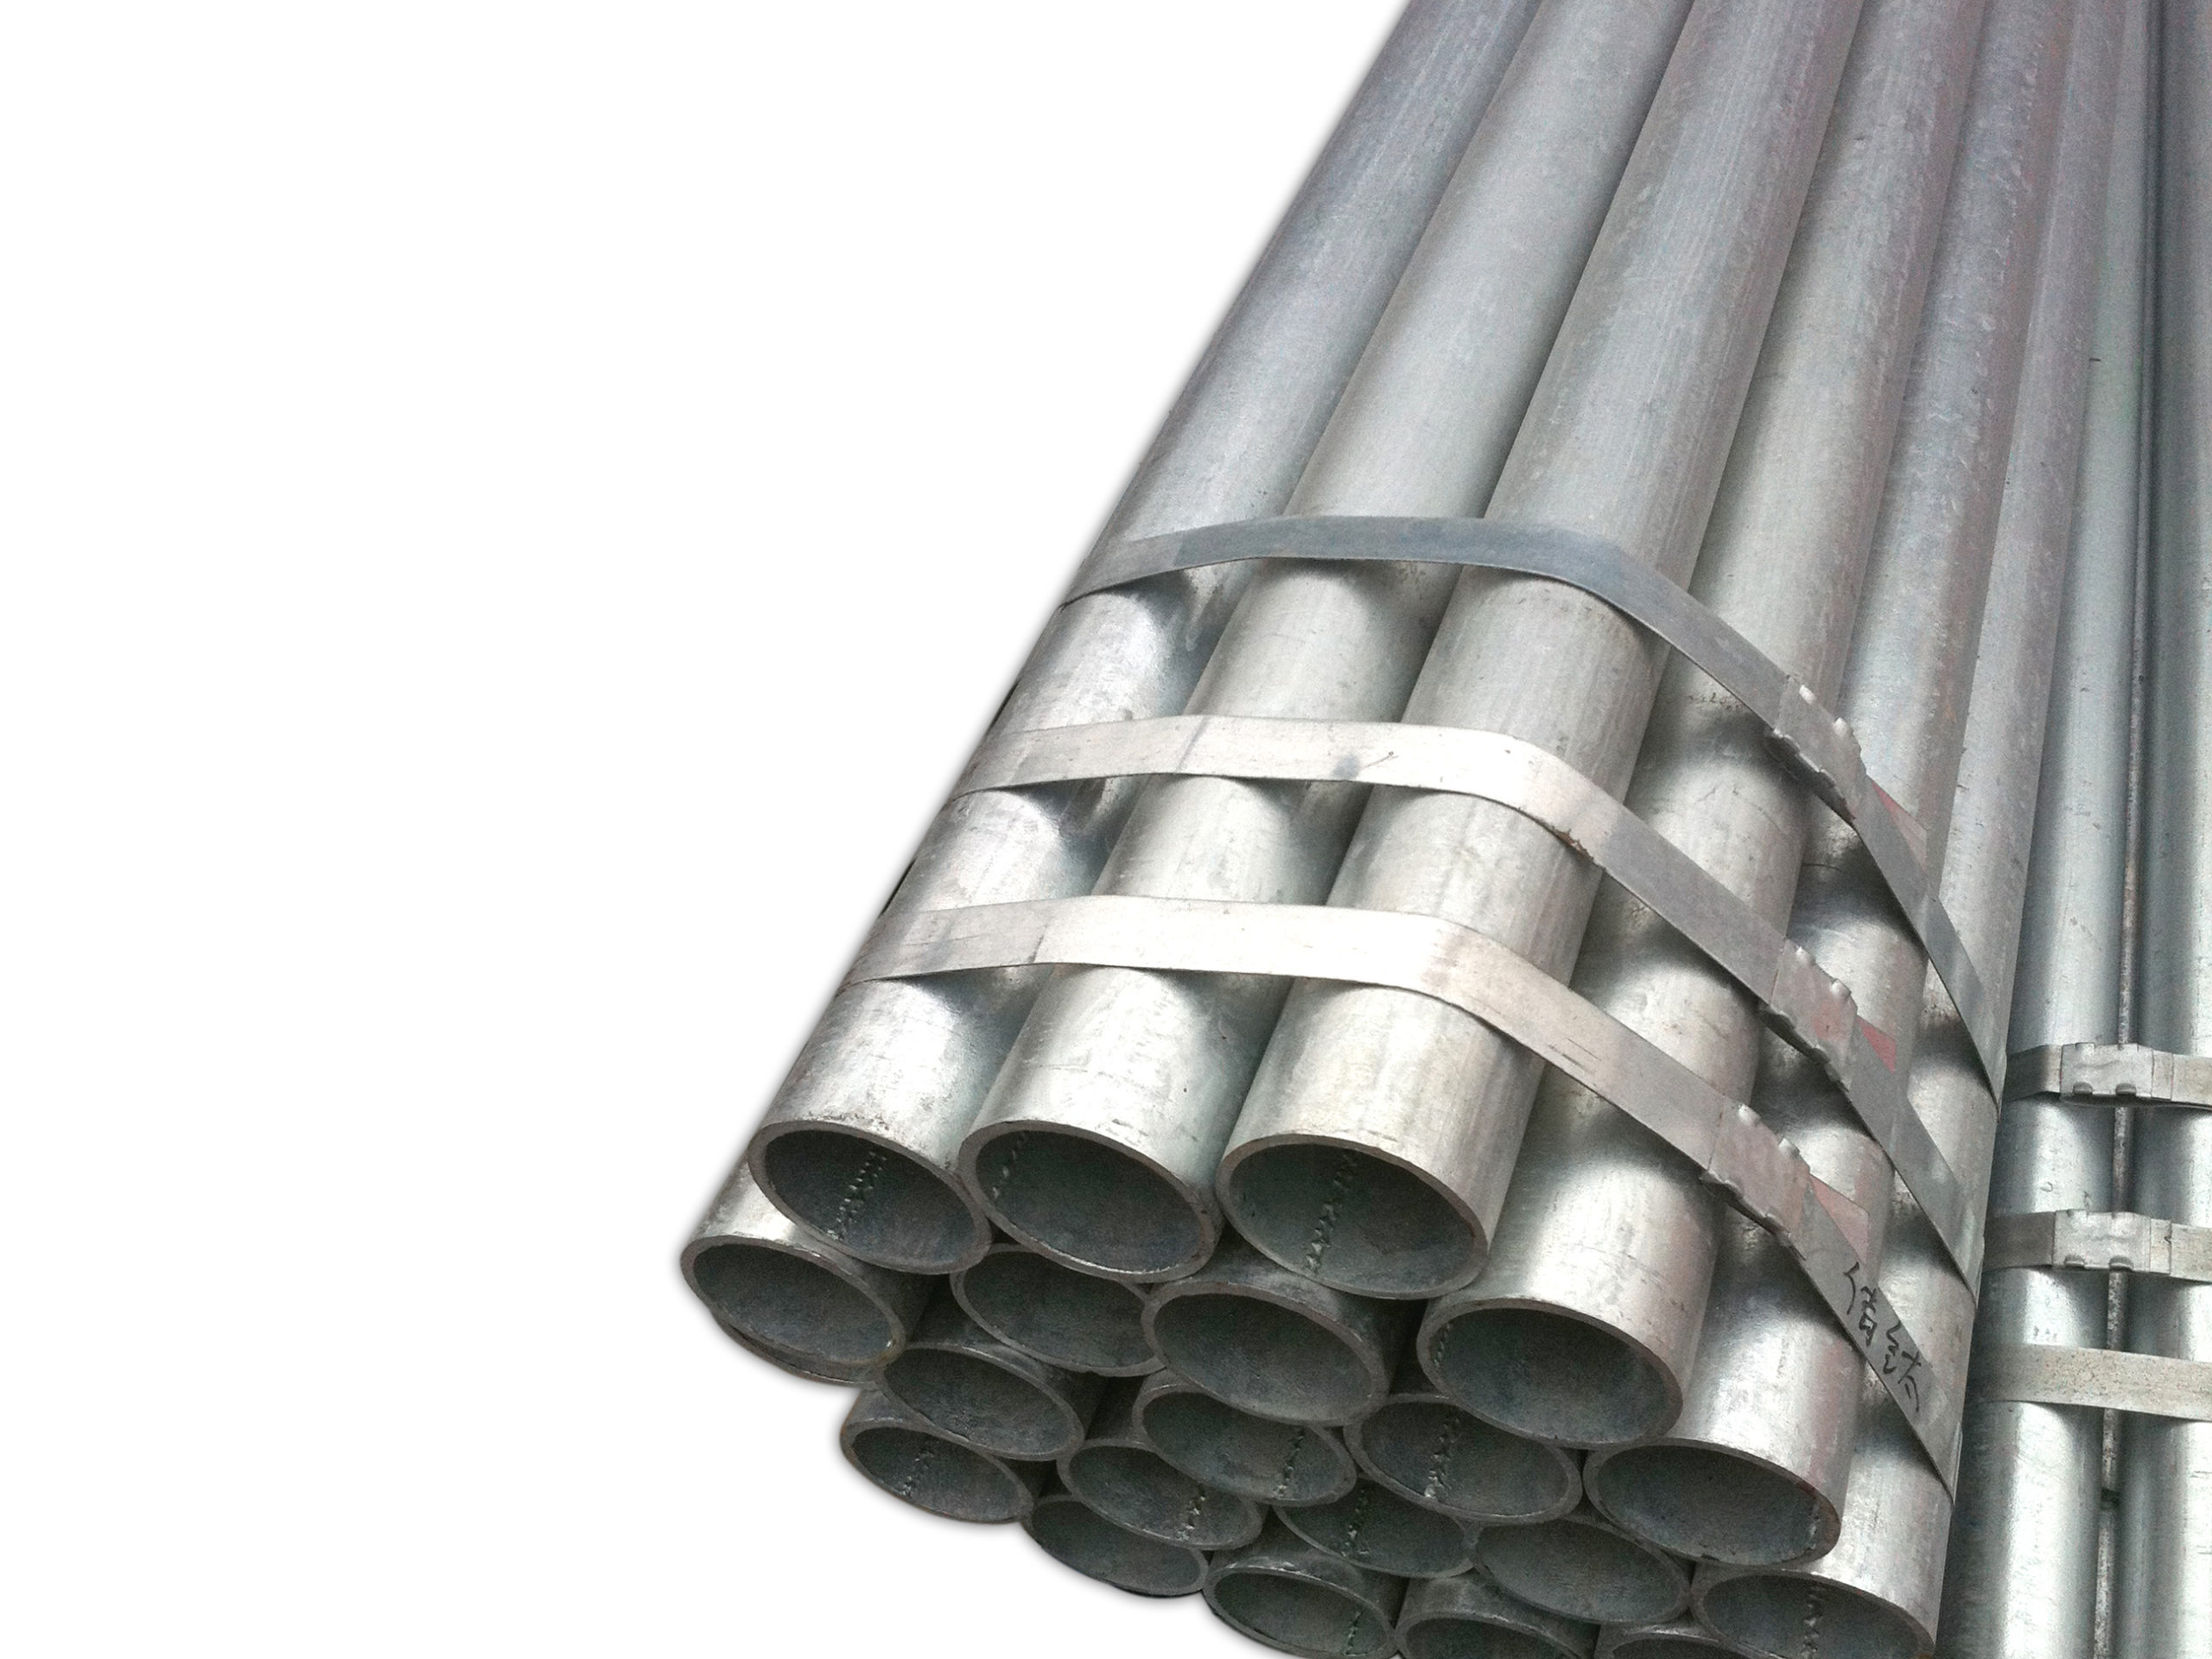 1.5 Galvanized Pipe With GI Tube dimensions